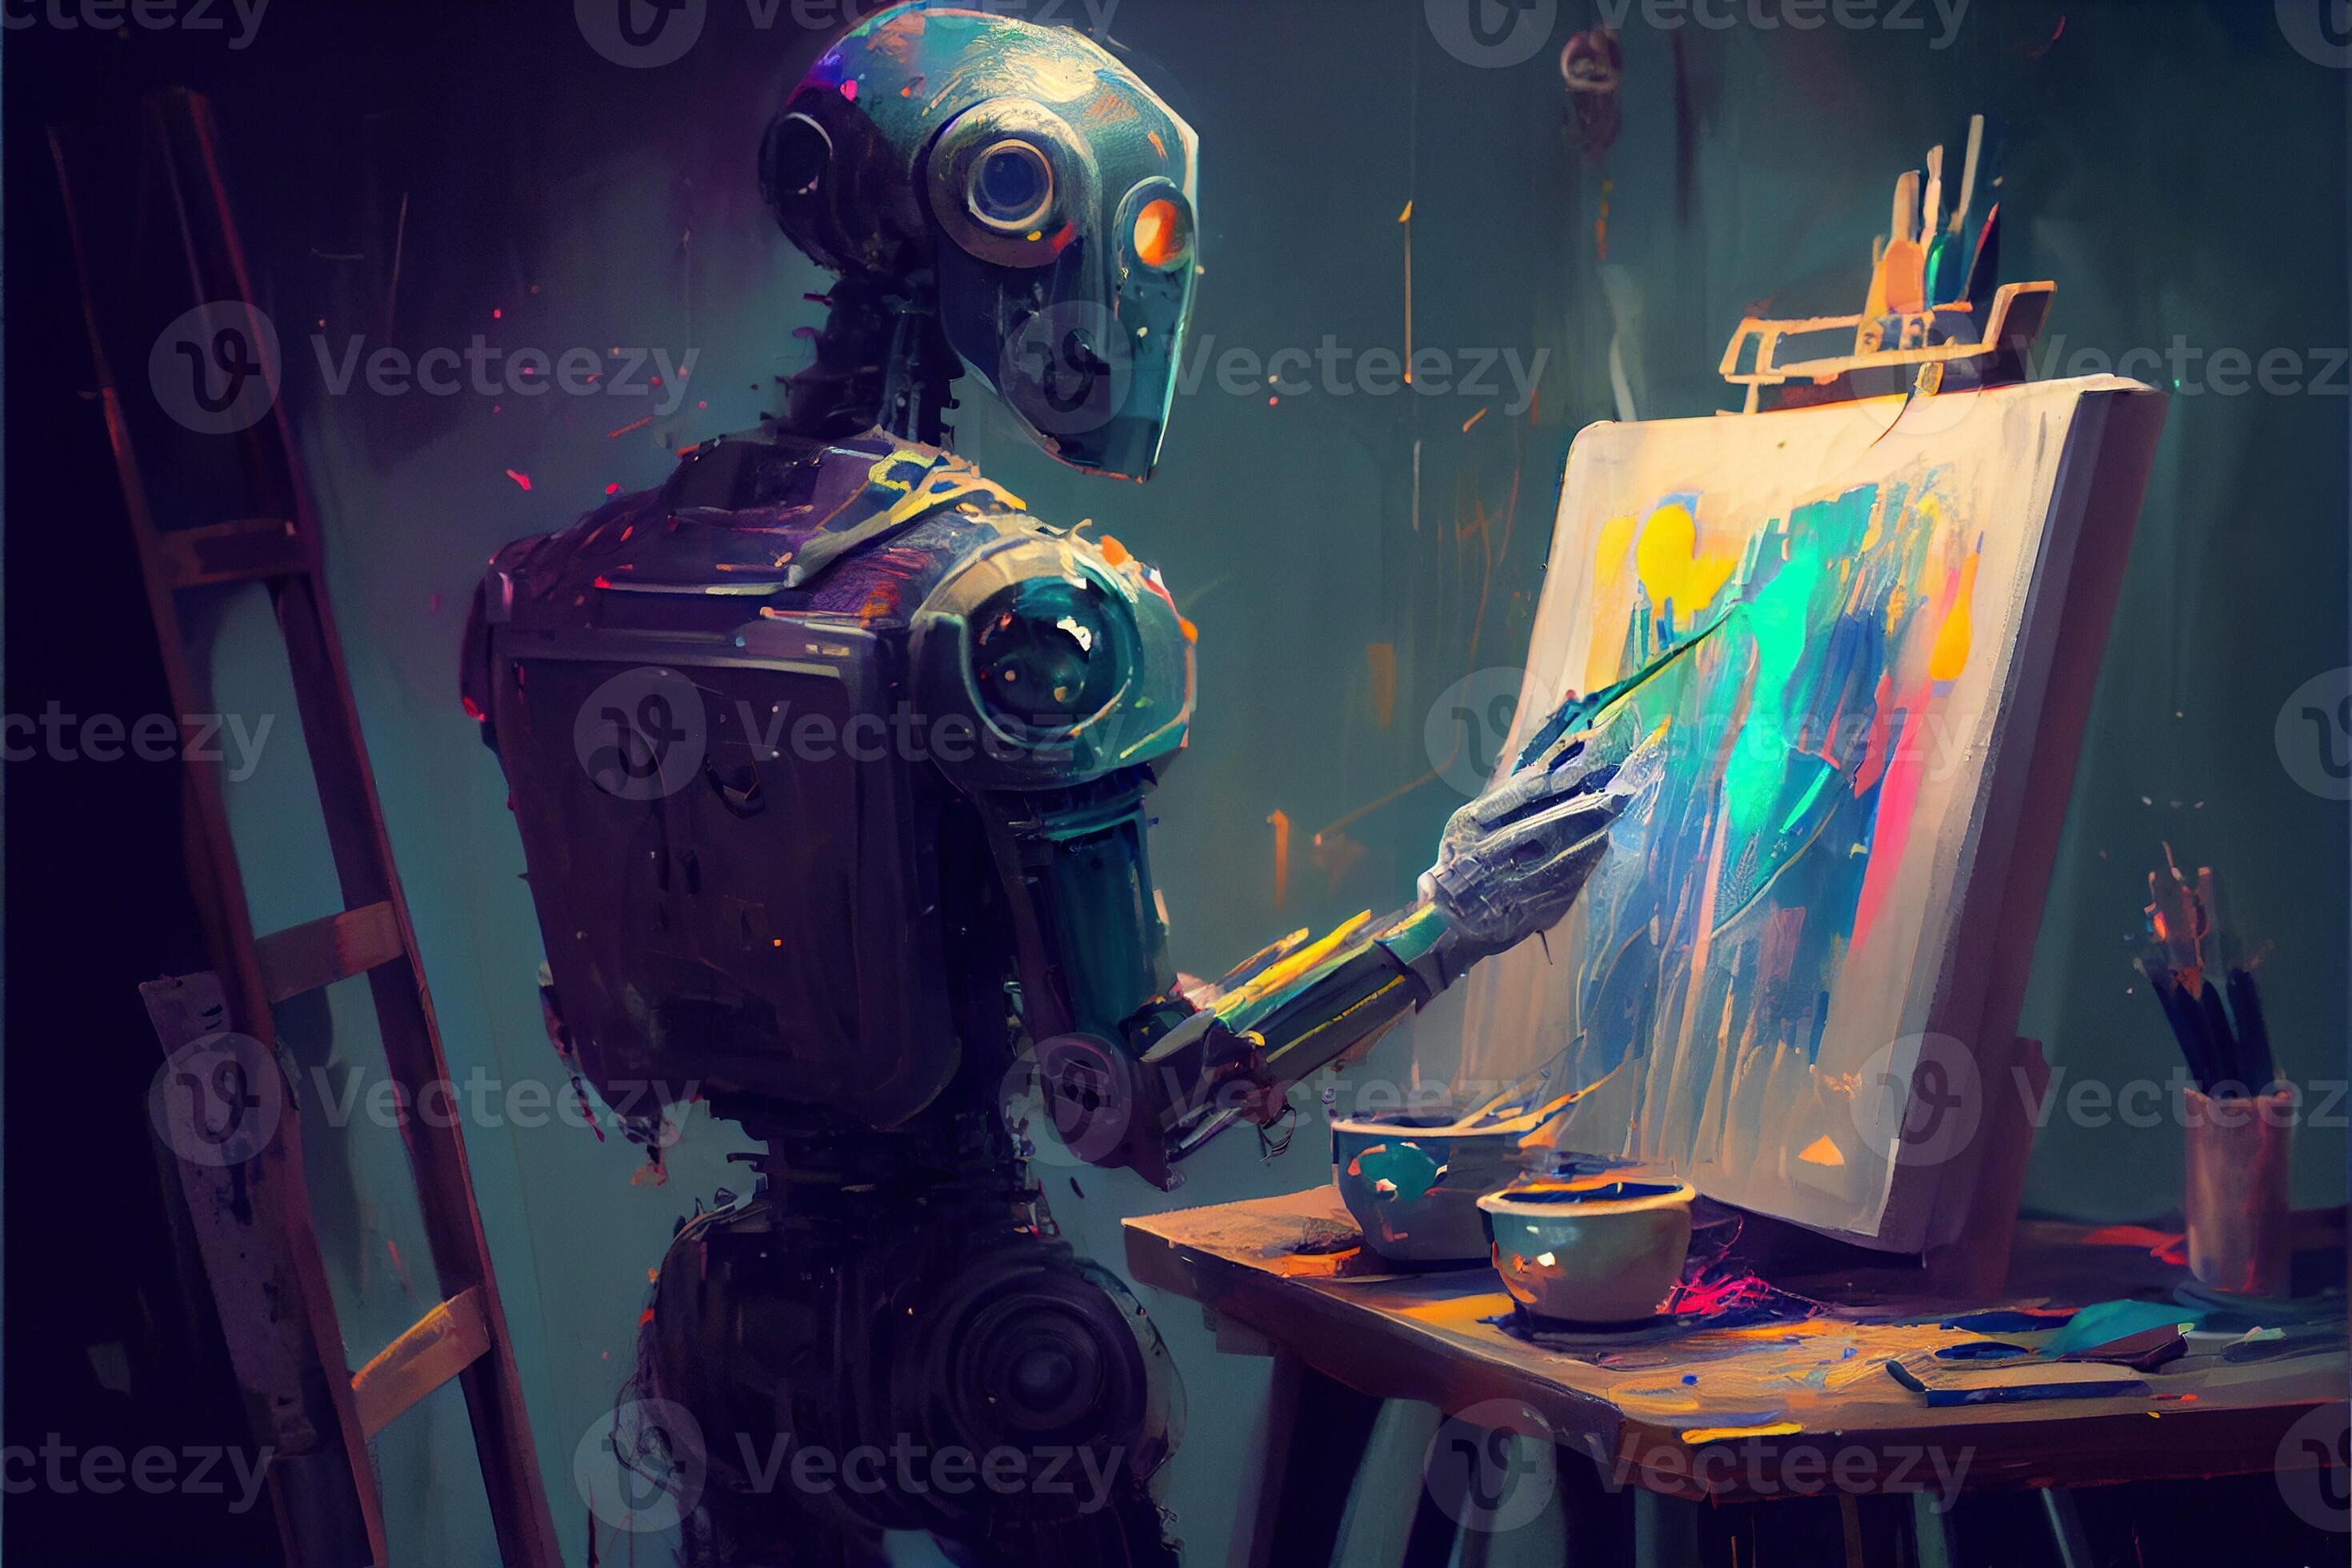 overskæg mild Sober Generative AI illustration of Cyborg Ai robot artist in dark studio next to  his easel, painting and paints while working, neural network generated art.  Digitally painting, generated image. 22701574 Stock Photo at